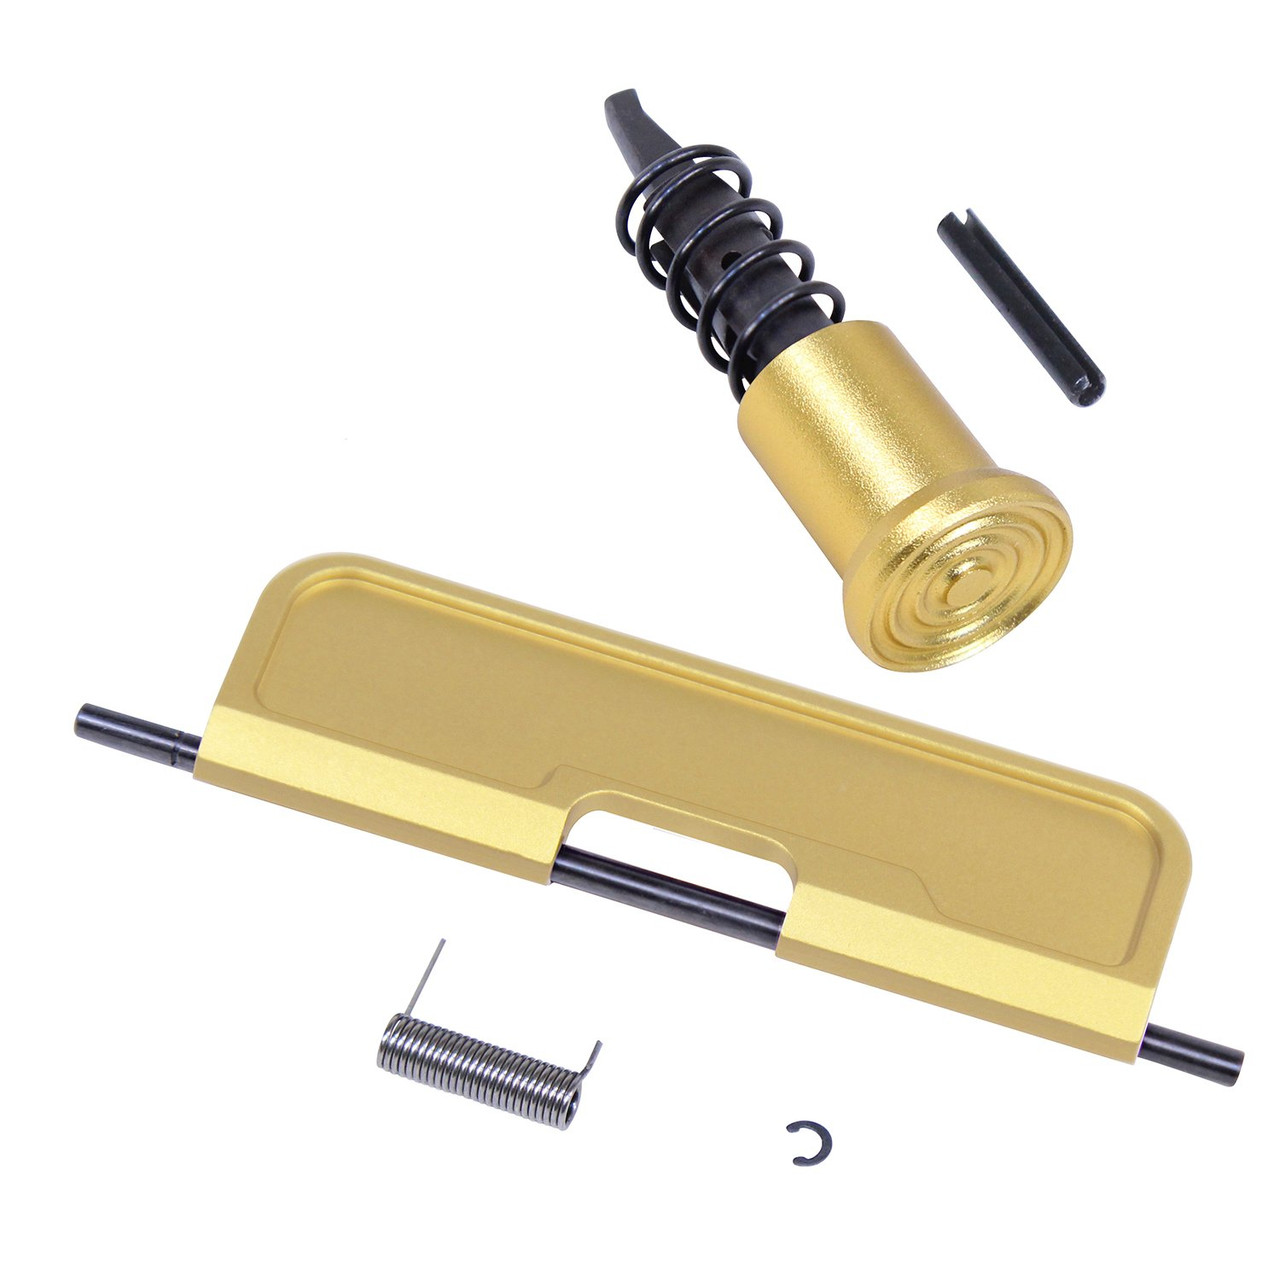 Guntec USA 223UPPER-CKIT-G3-GOLD AR-15 Upper Completion Kit With Gen 3 Dust Cover (Anodized Gold)